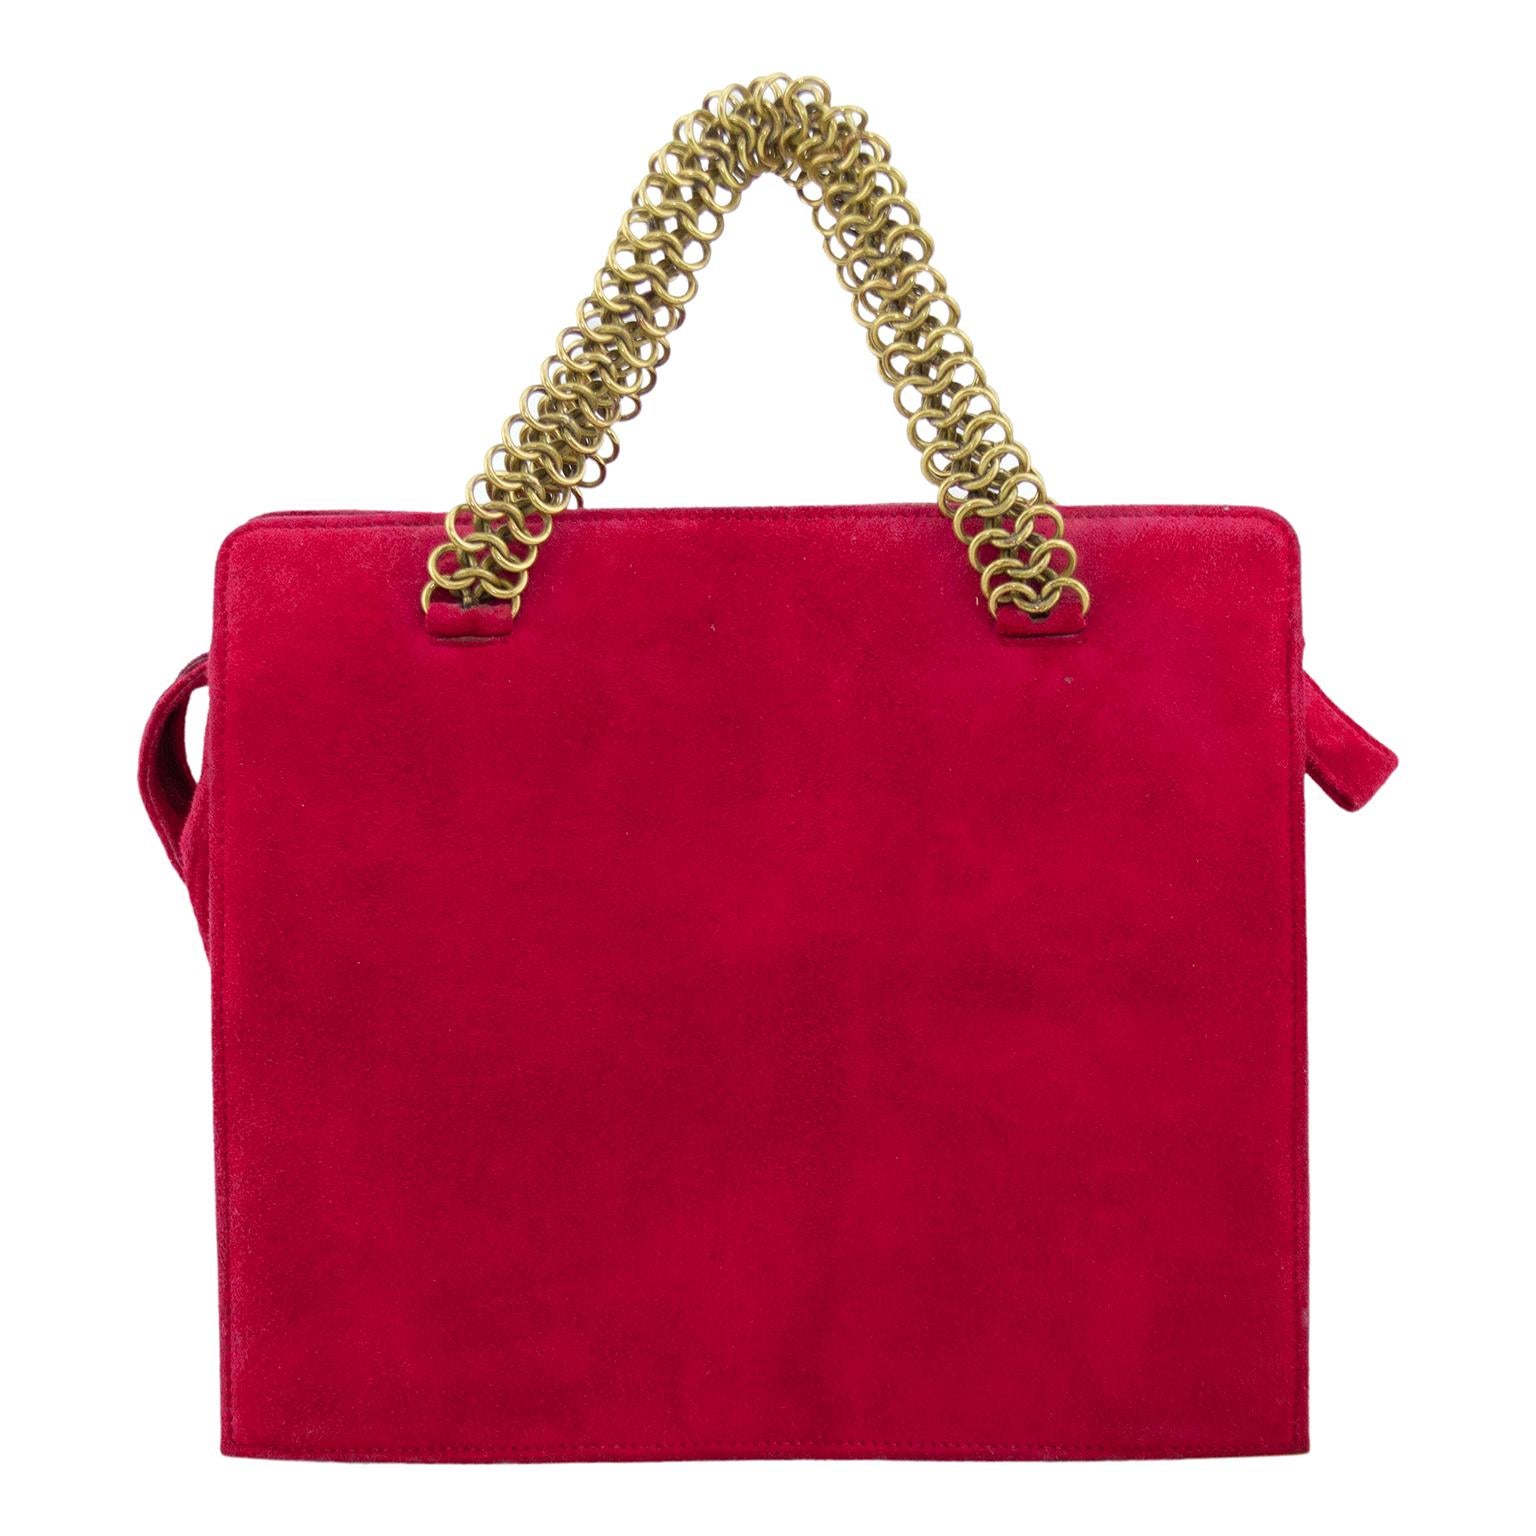 prada red bag with gold chain